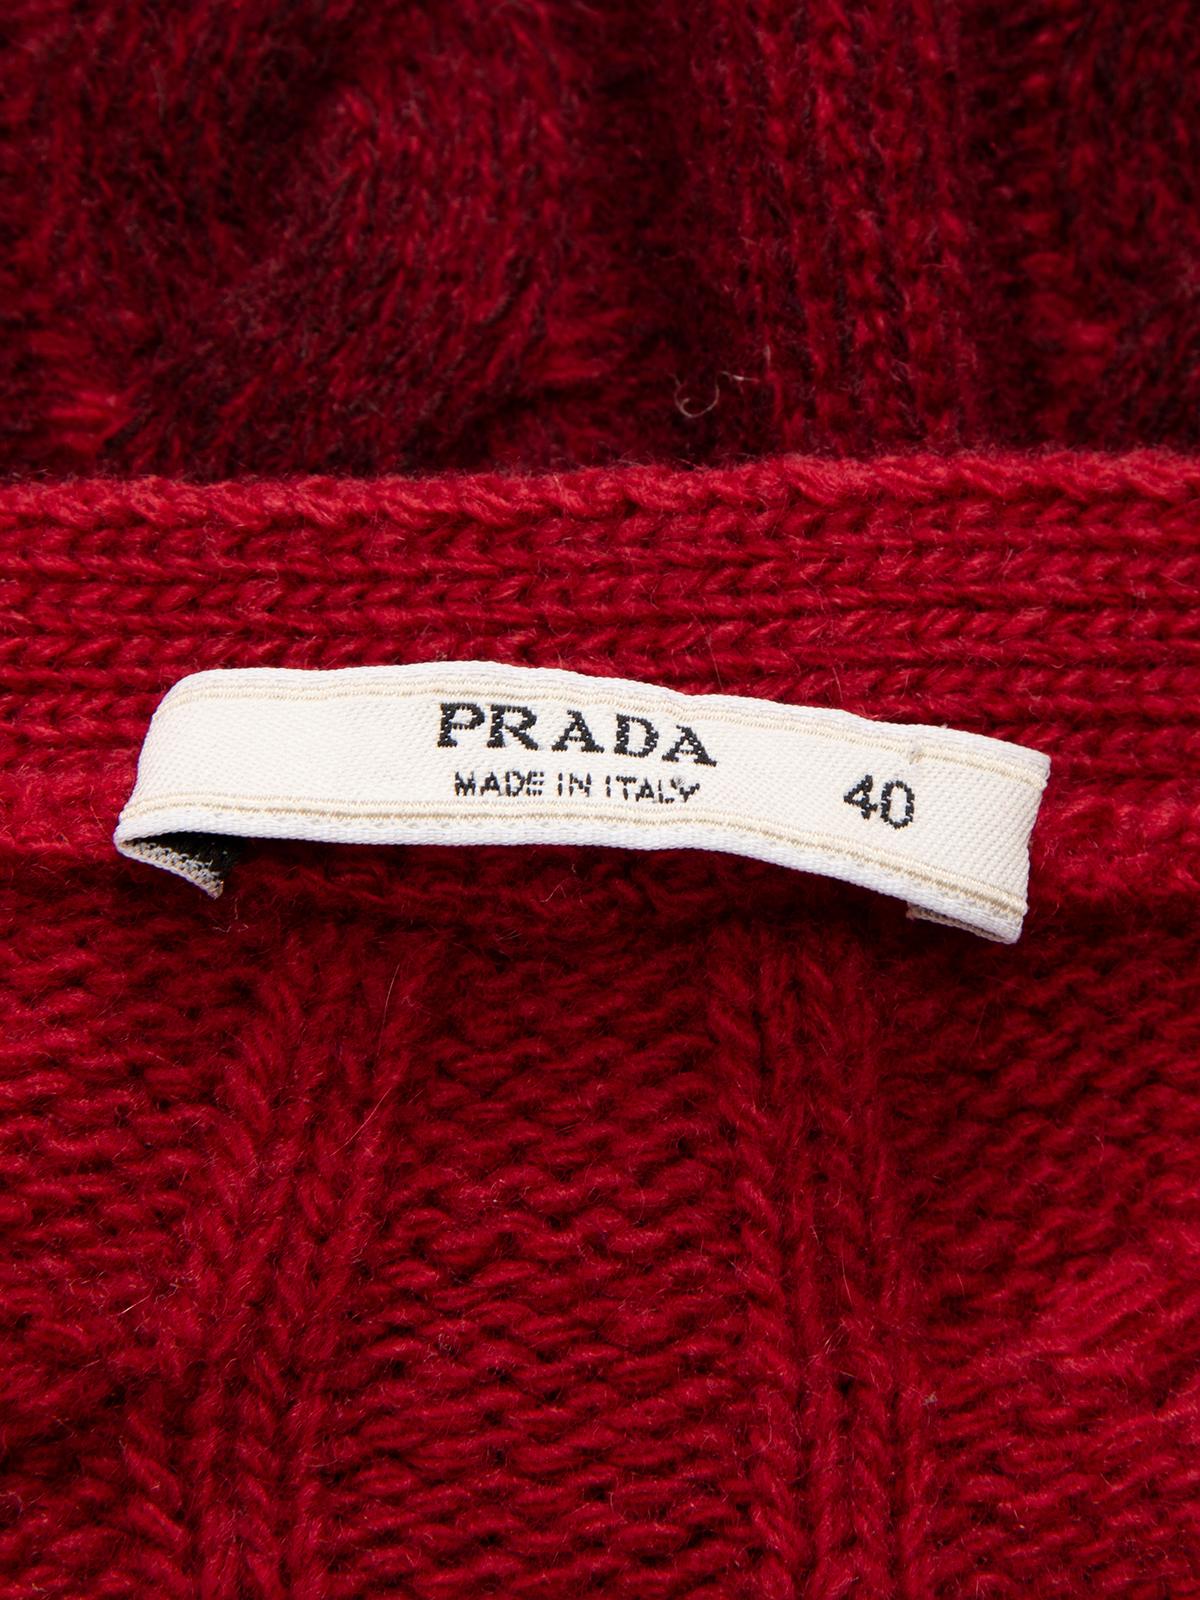 Pre-Loved Prada Women's Burgundy Cable Knit Cardigan In Excellent Condition For Sale In London, GB